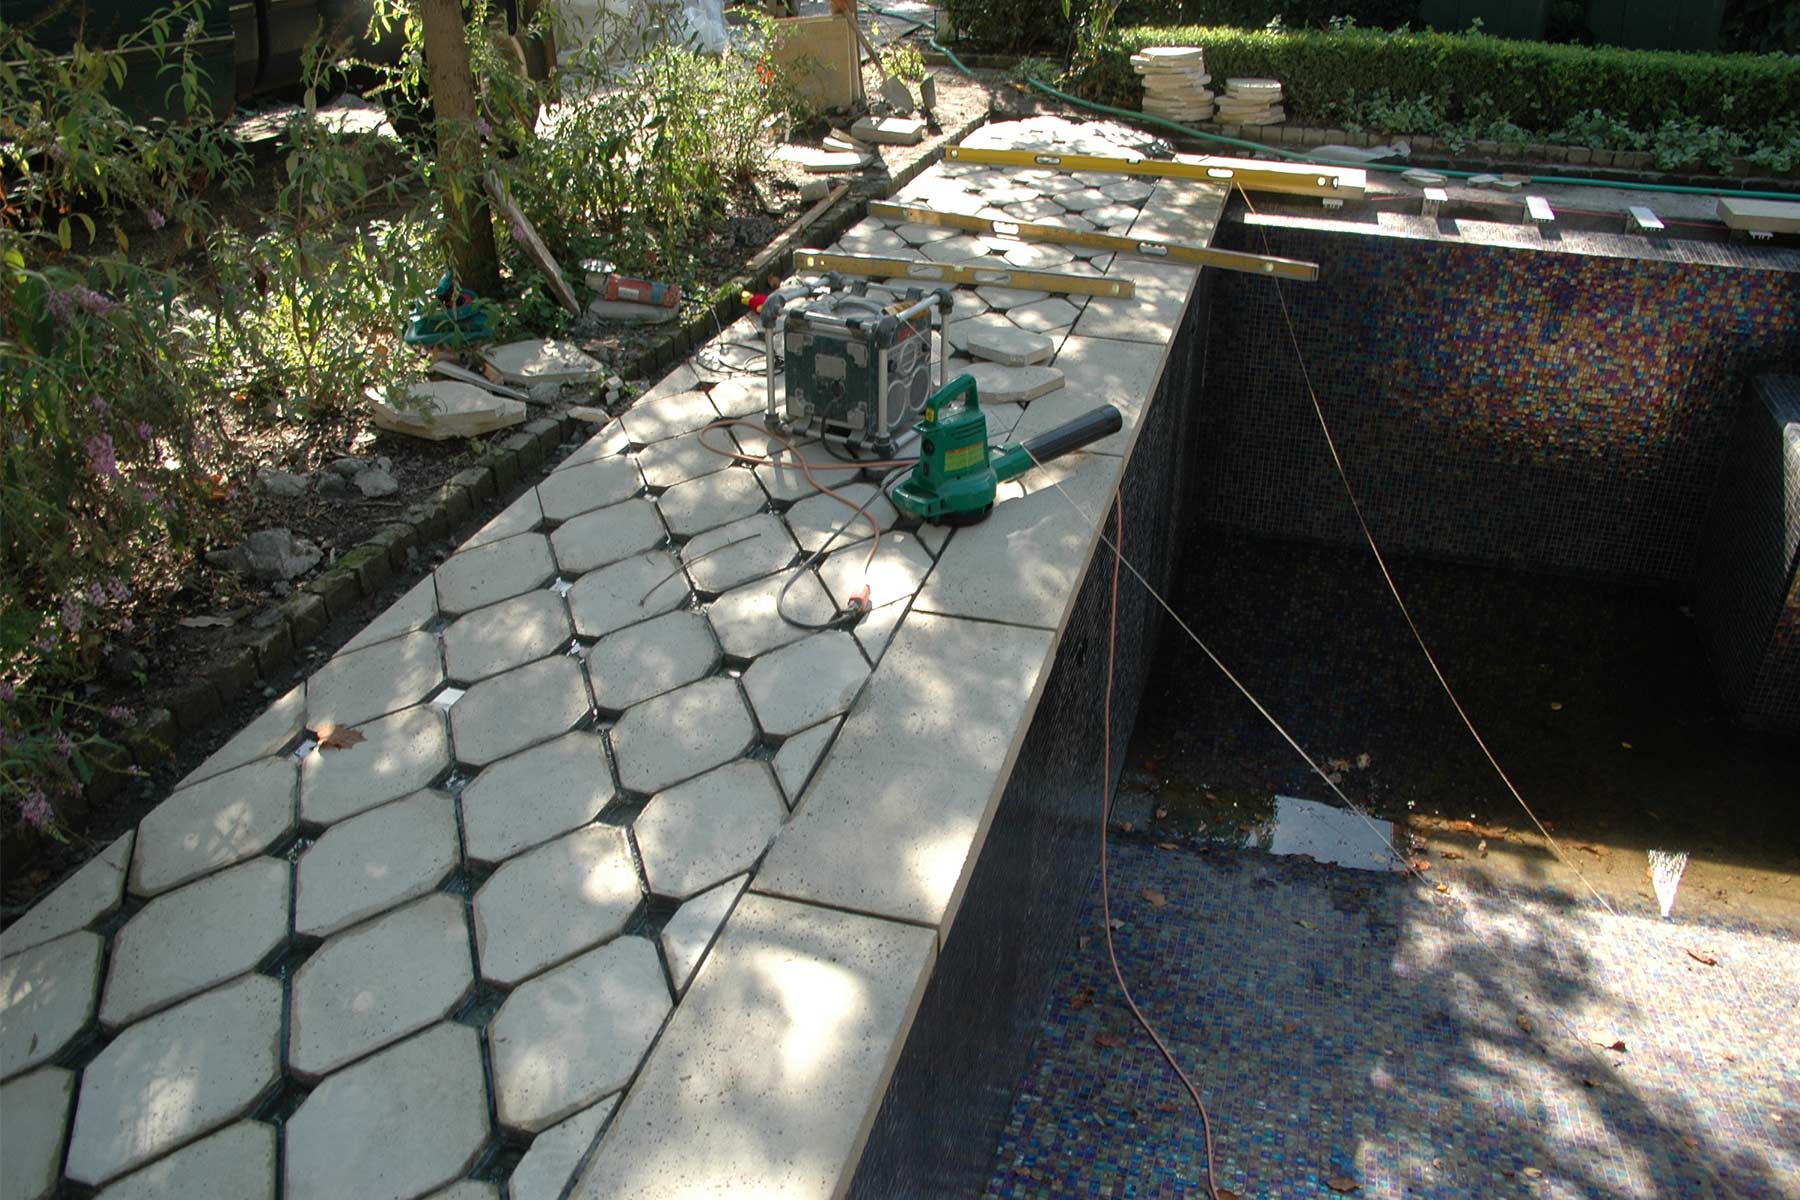 A close-up look at pool coping tiles and concrete pavers around pool